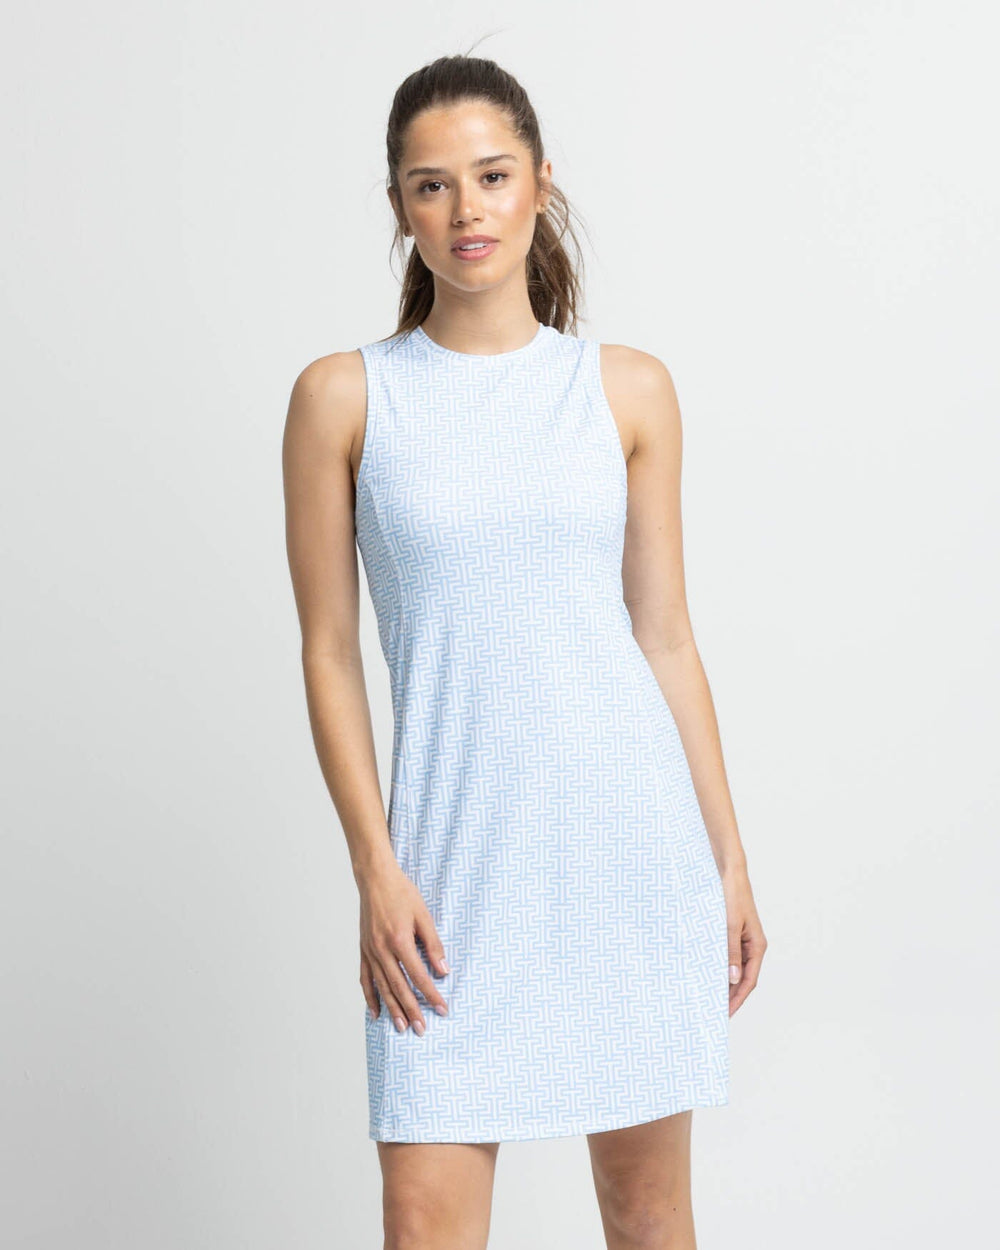 The front view of the Southern Tide Lyllee Printed Performance Dress by Southern Tide - Classic White